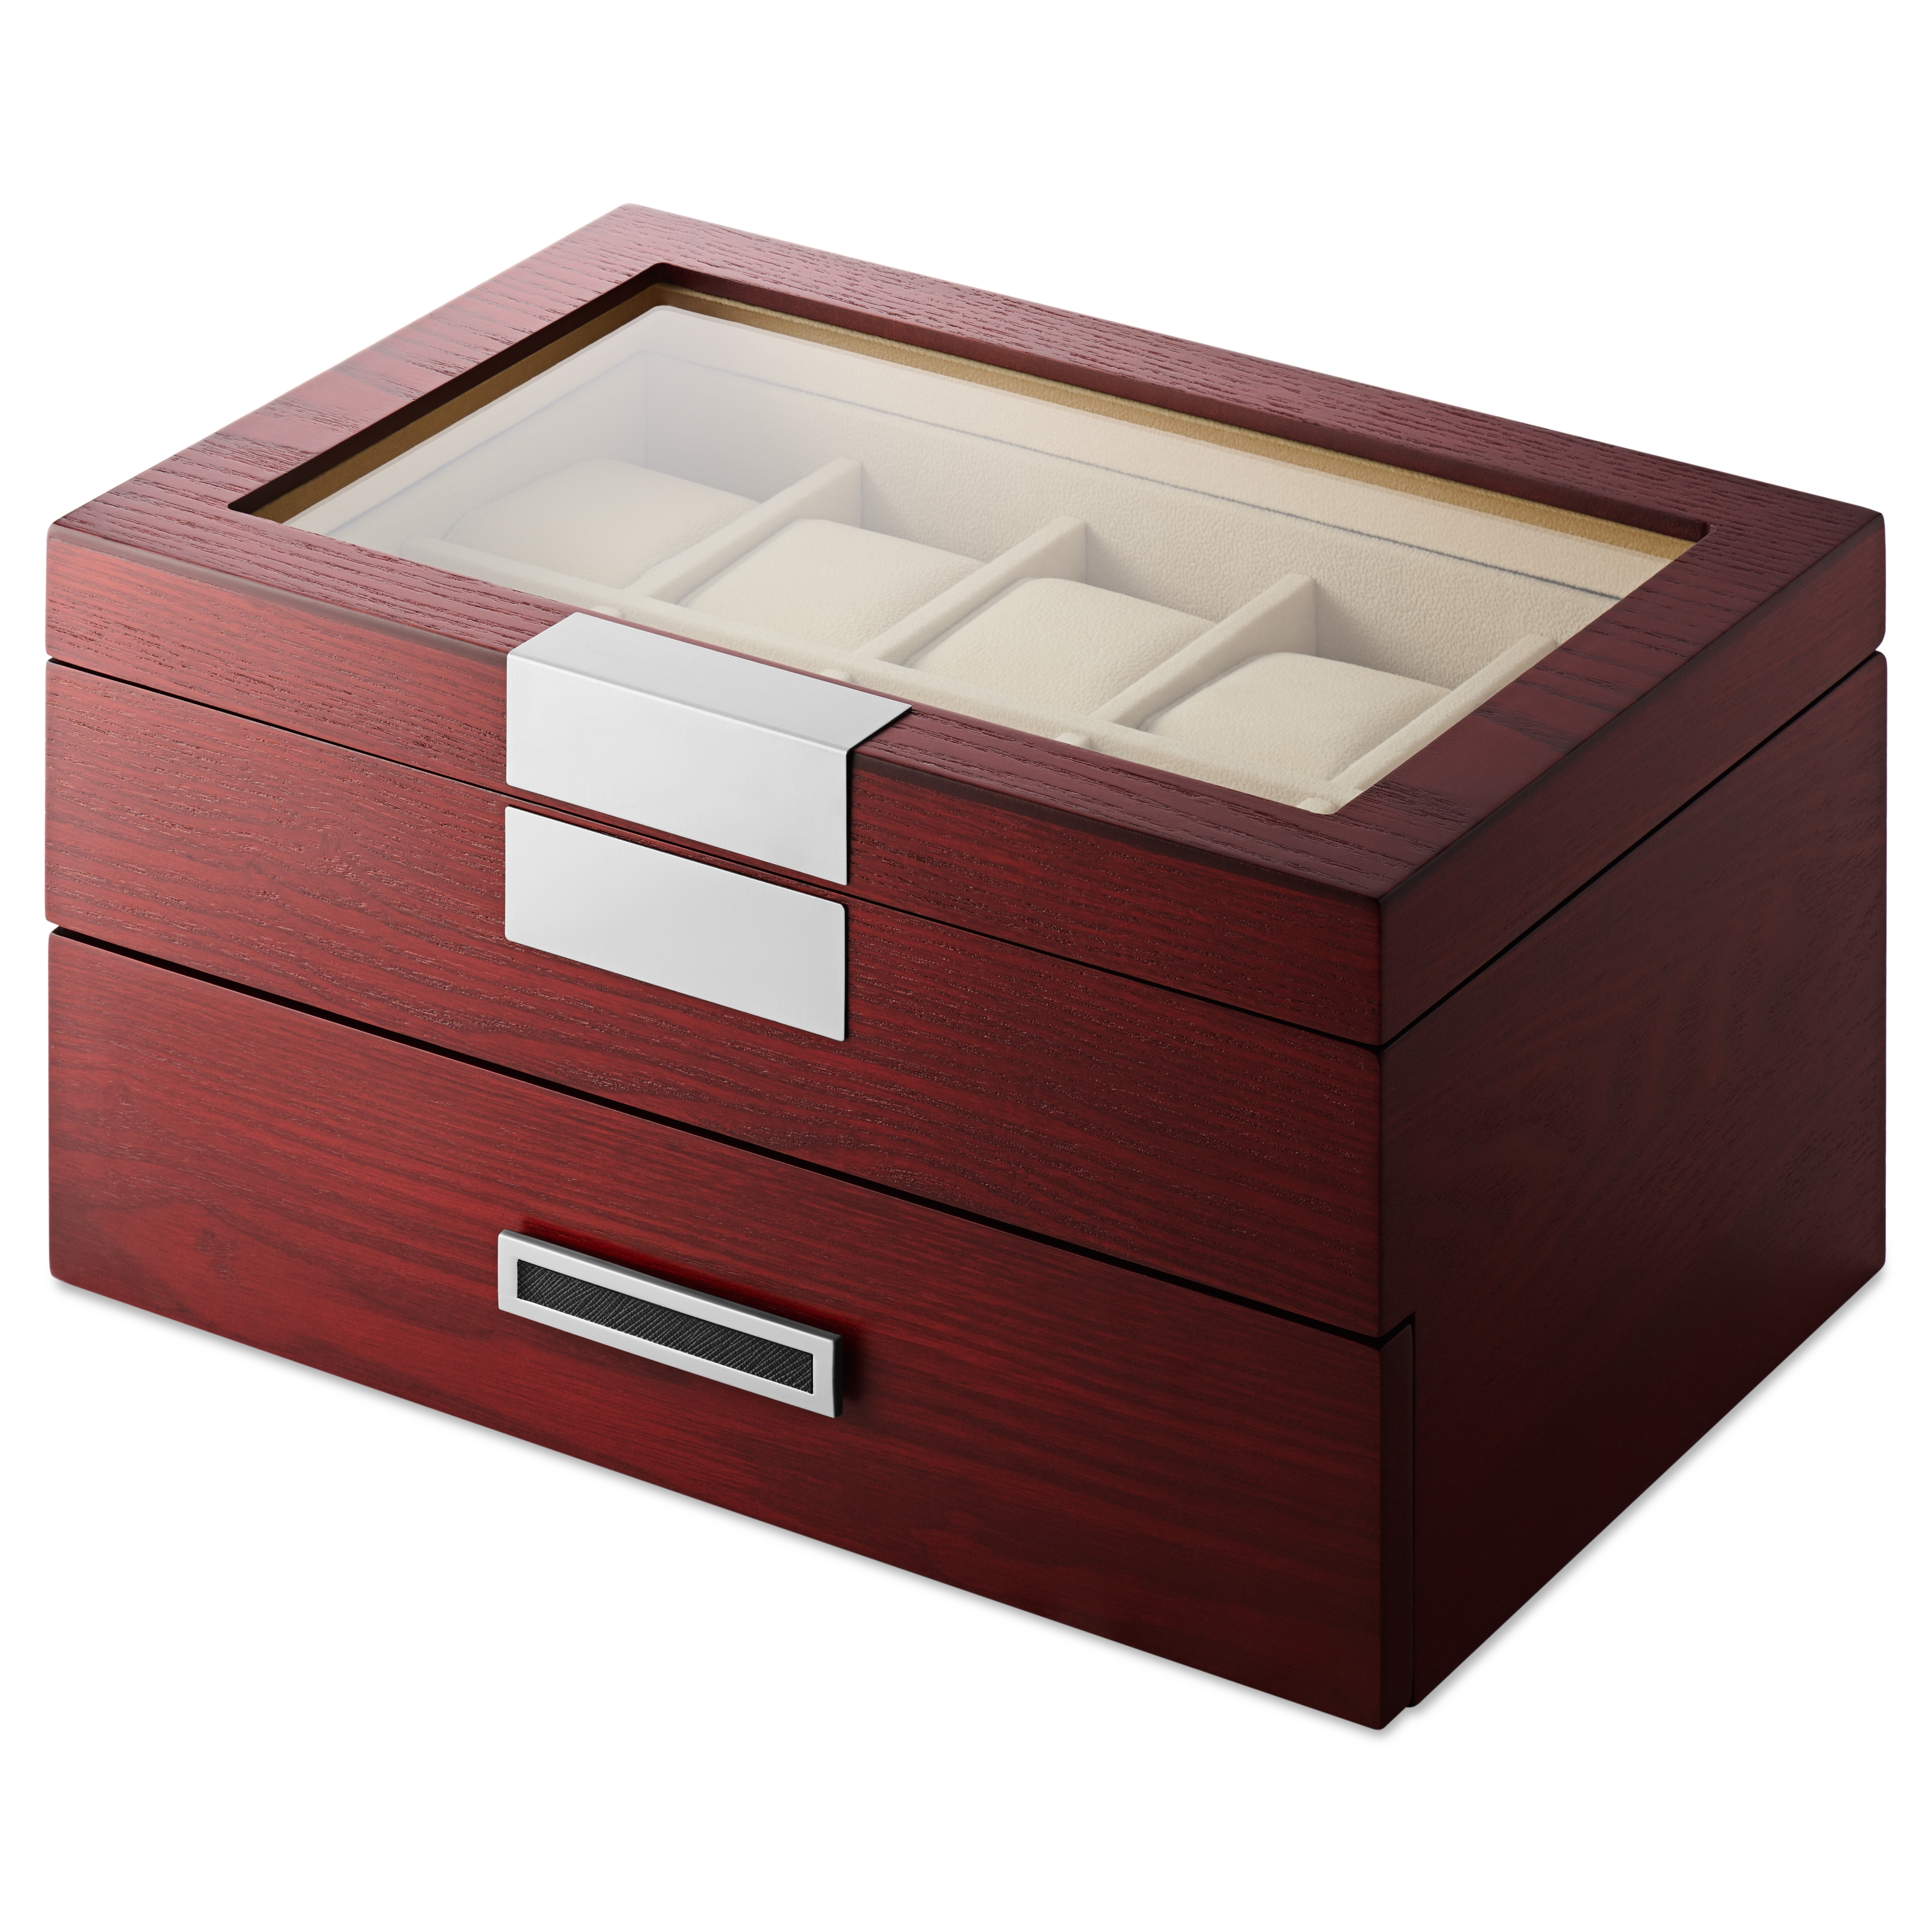 Watch boxes | 96 Styles for men in stock